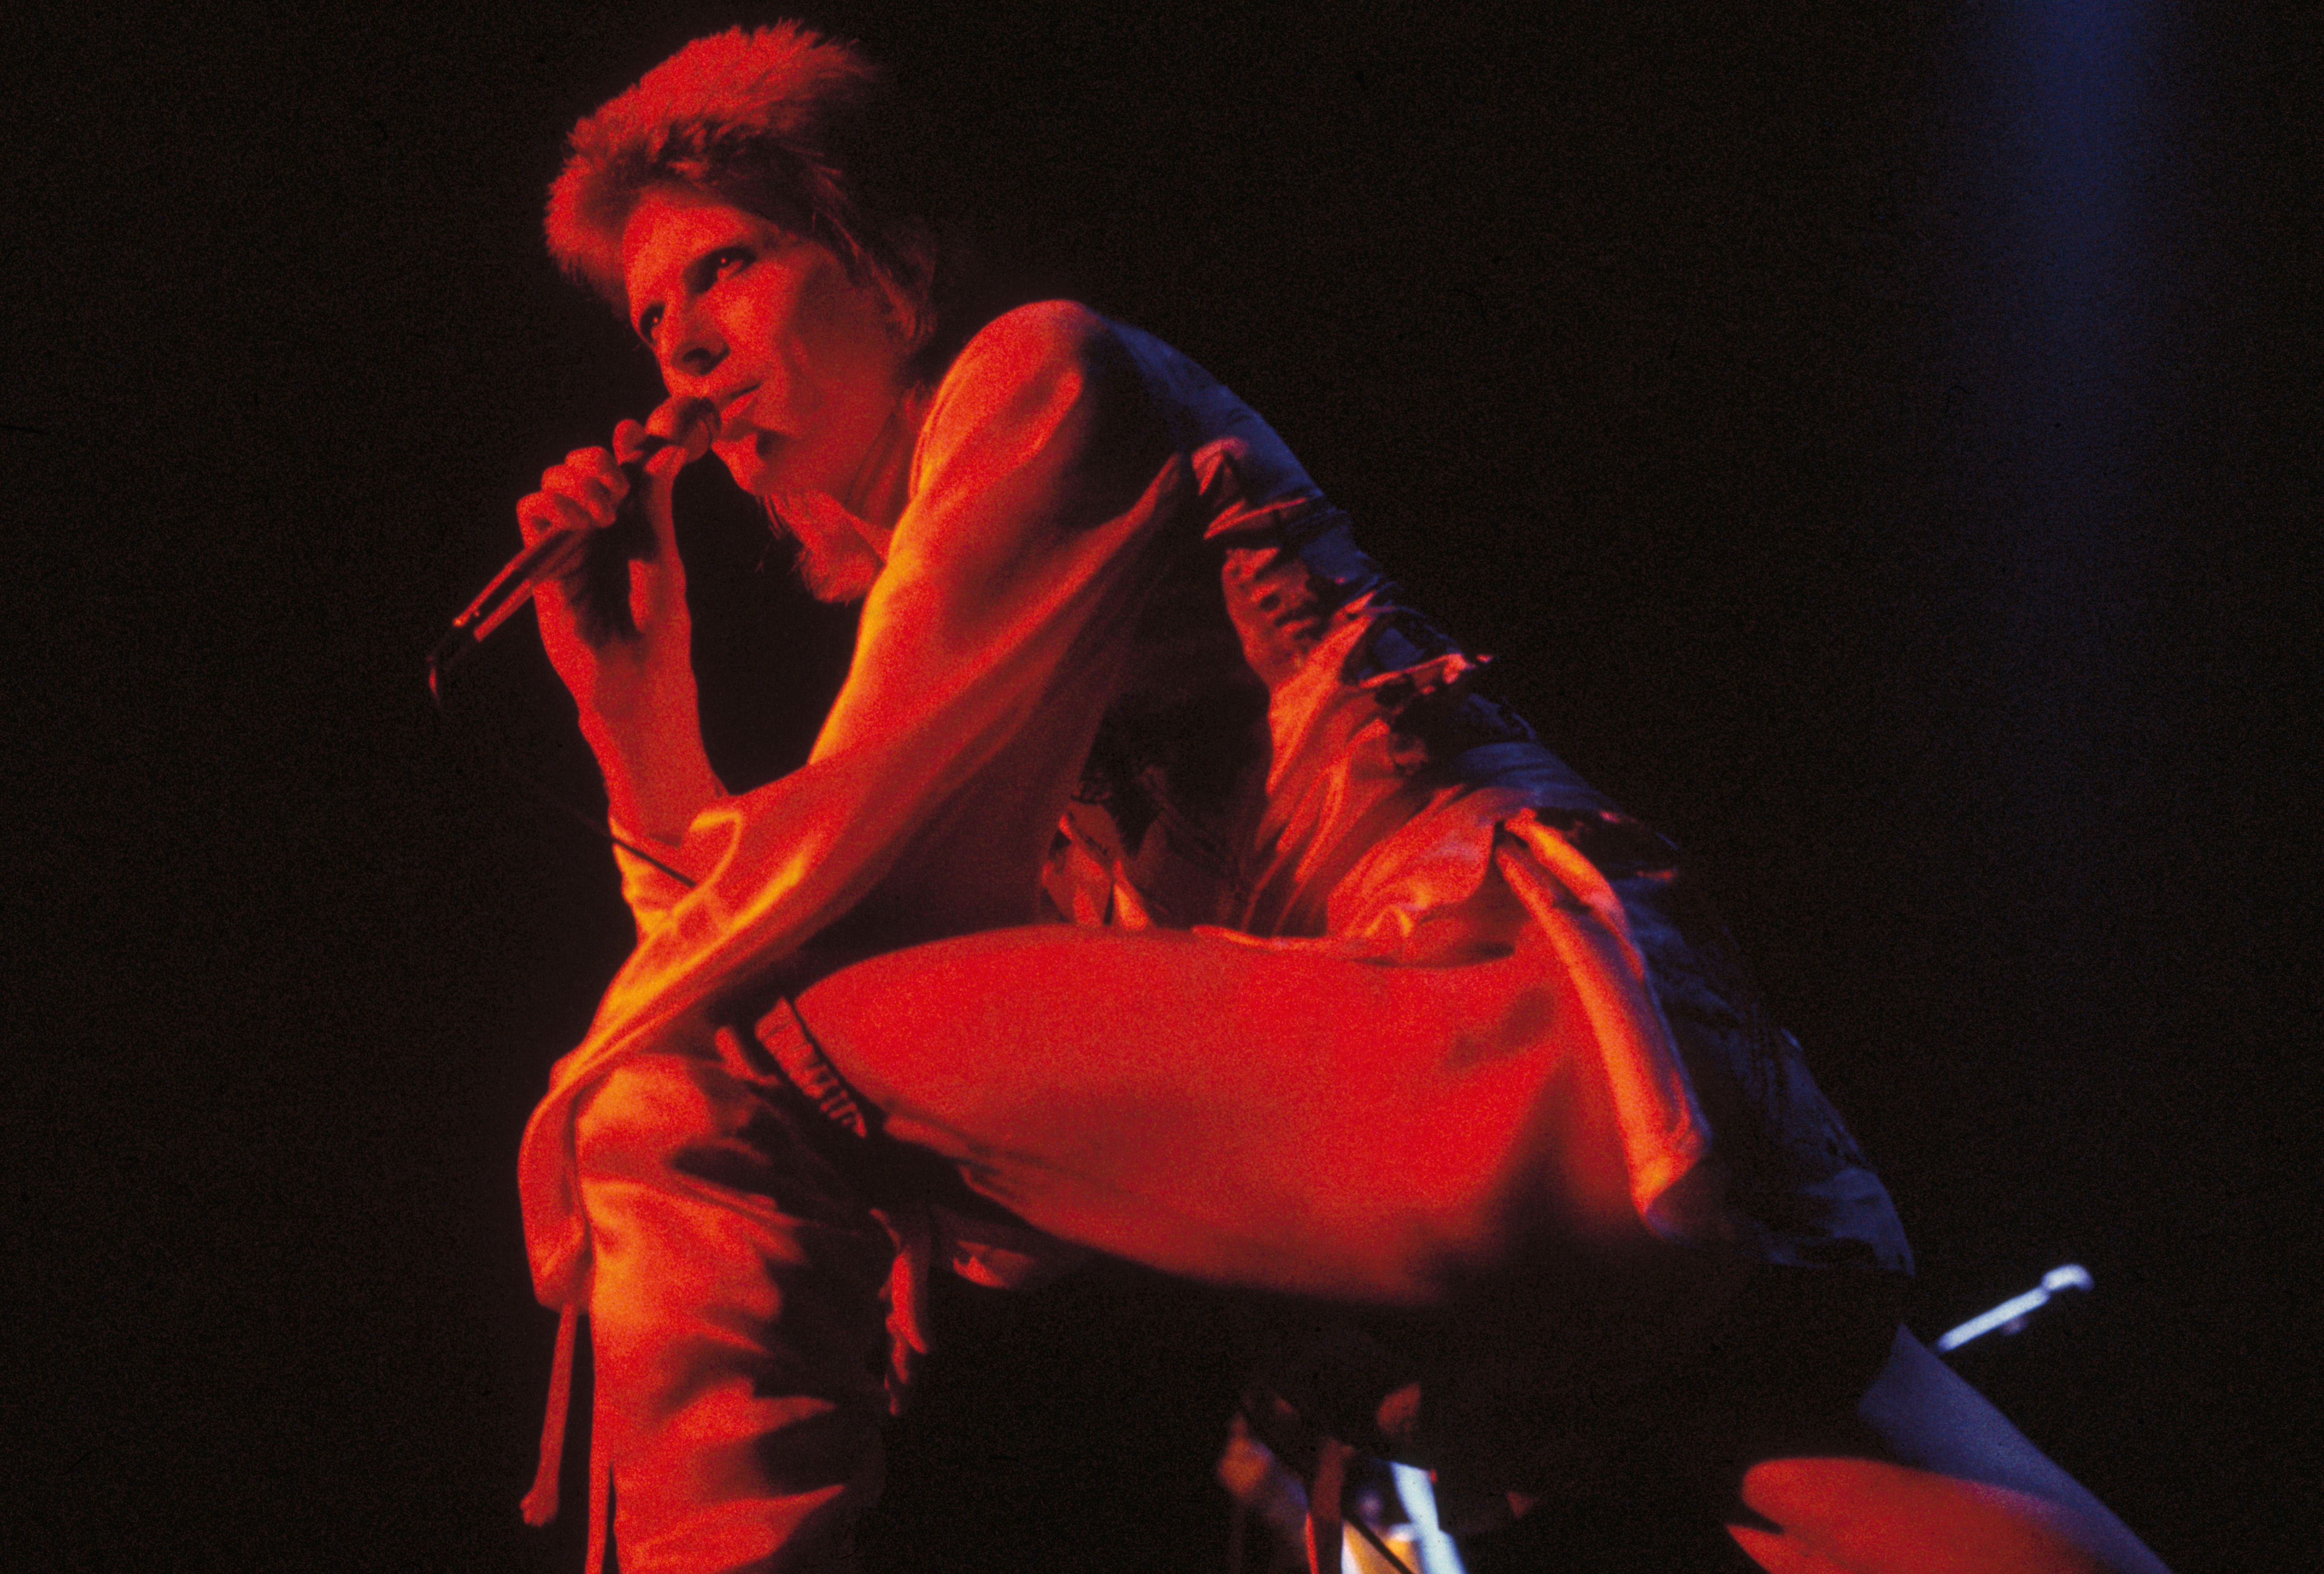 David Bowie performing as Ziggy Stardust at the Hammersmith Odeon, 1973. (Getty Images)